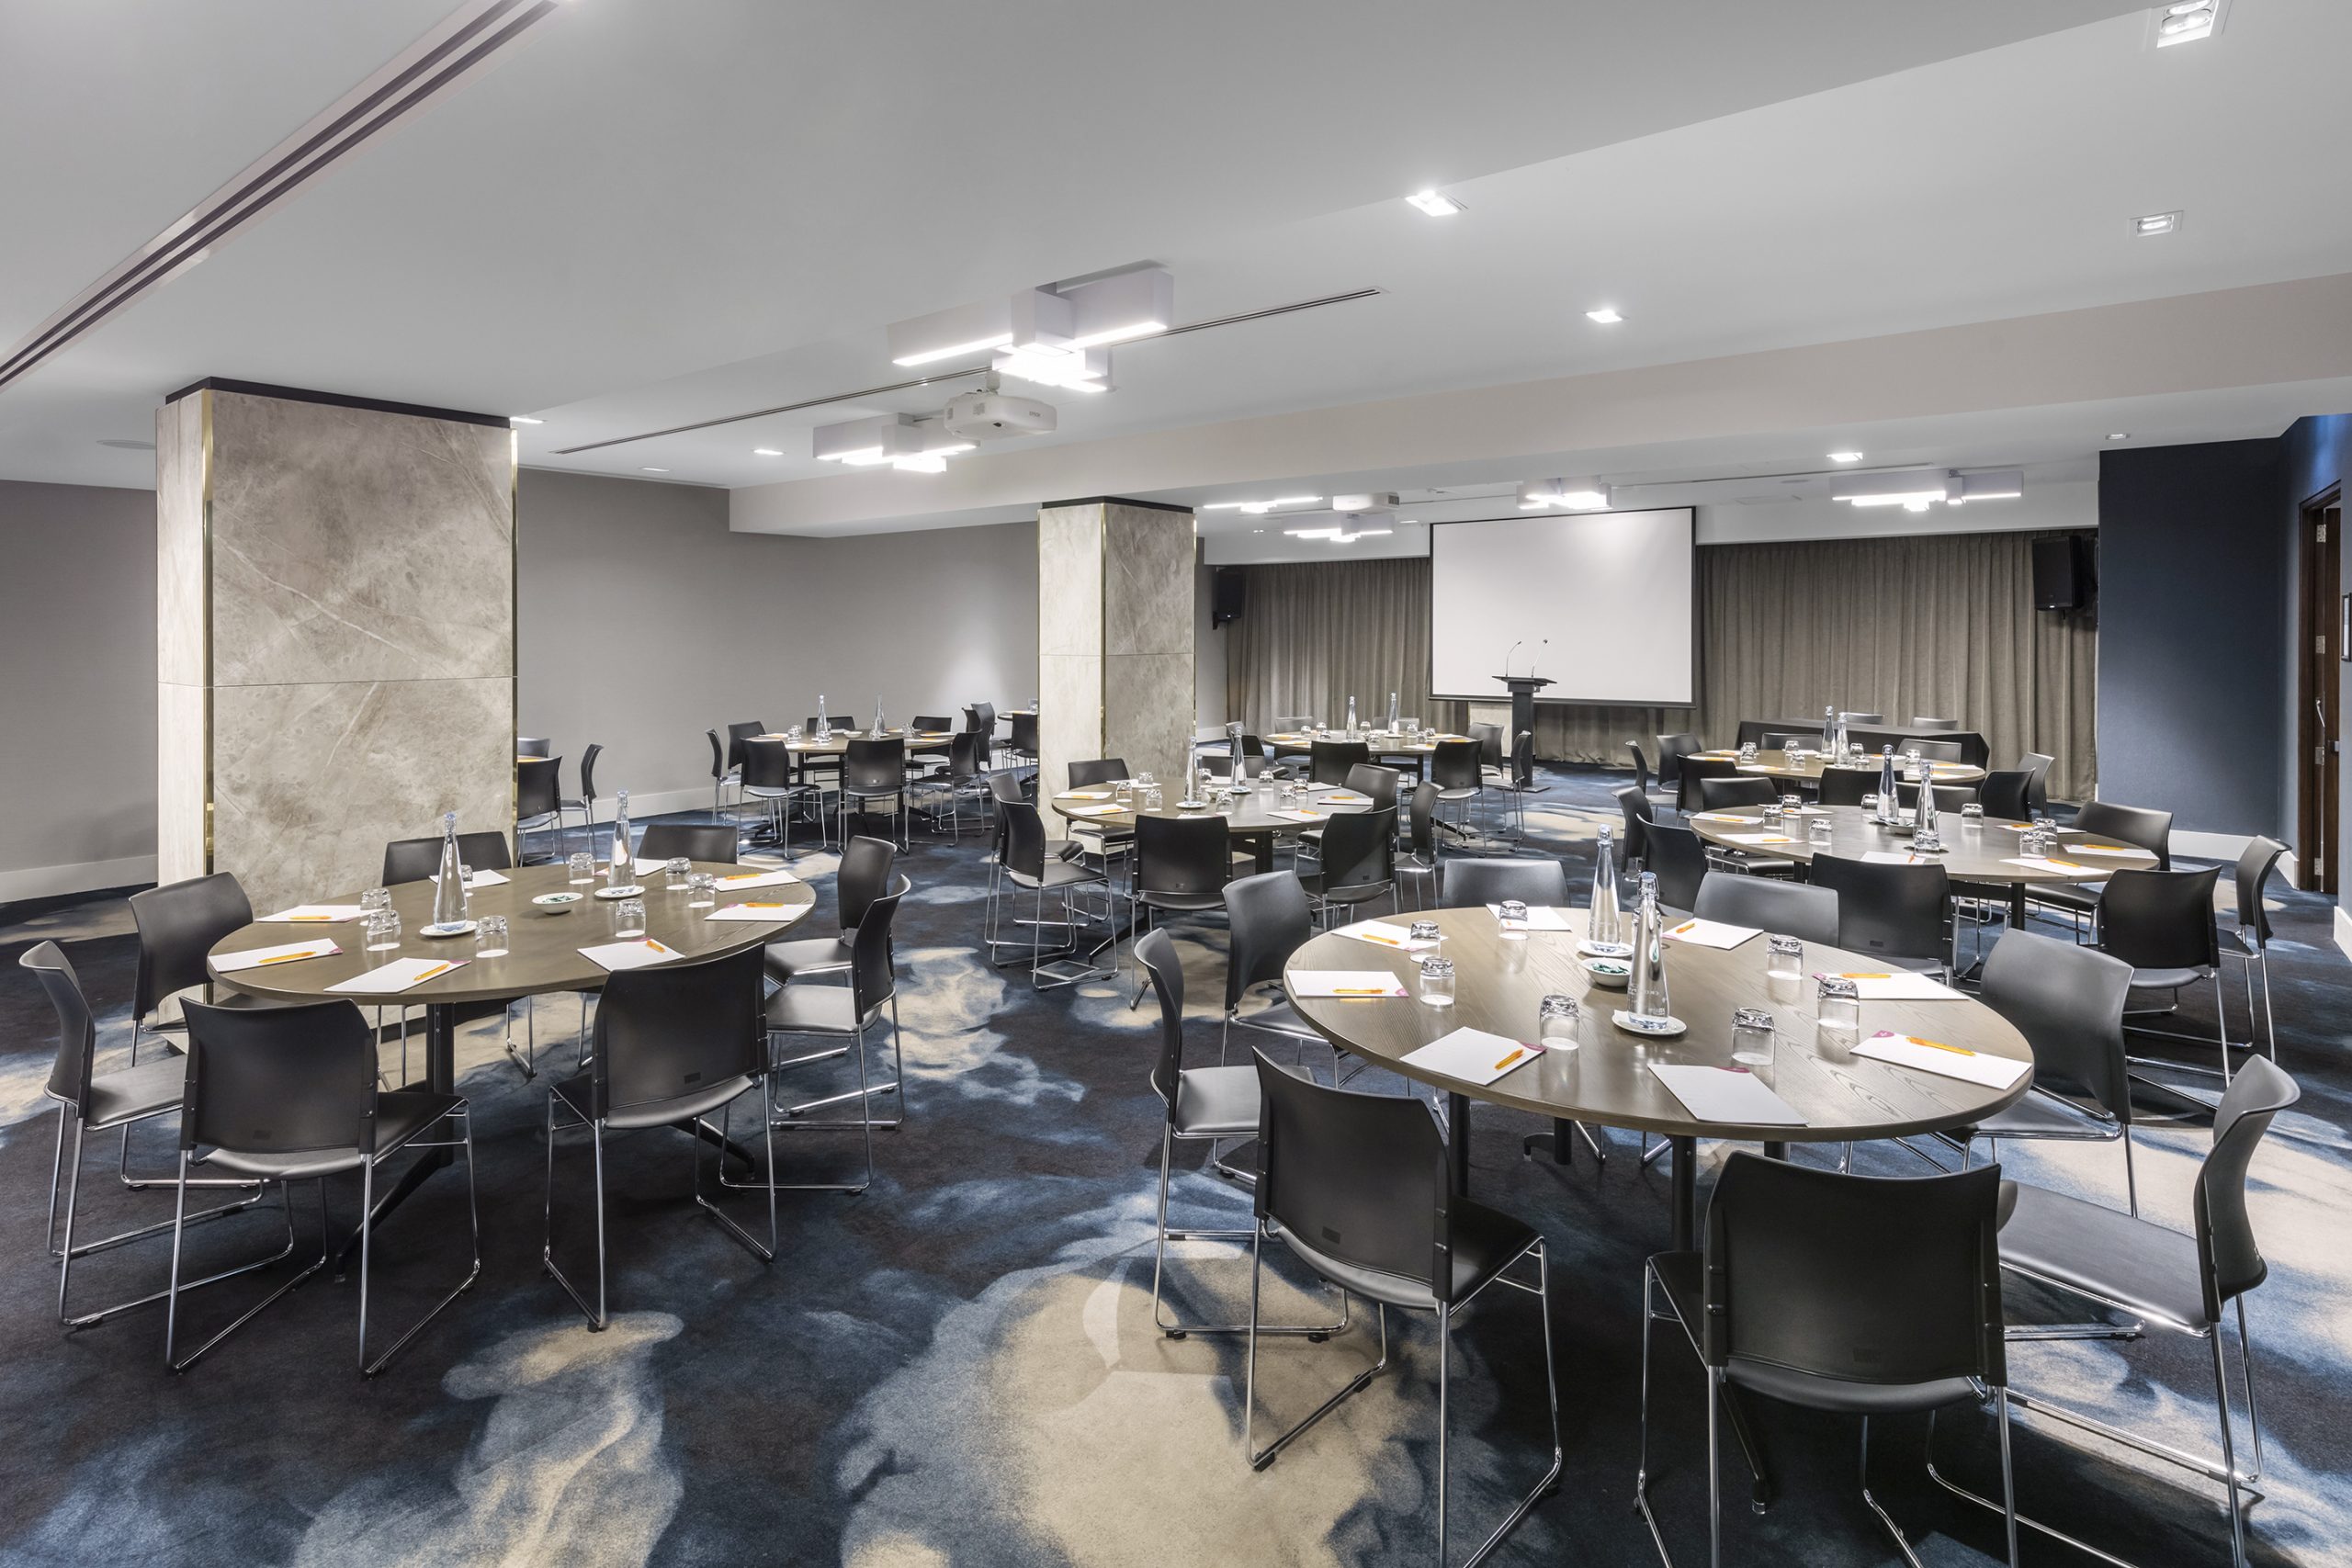 The Golden Fleece Room is a Large, modern, Conference and Meeting Room